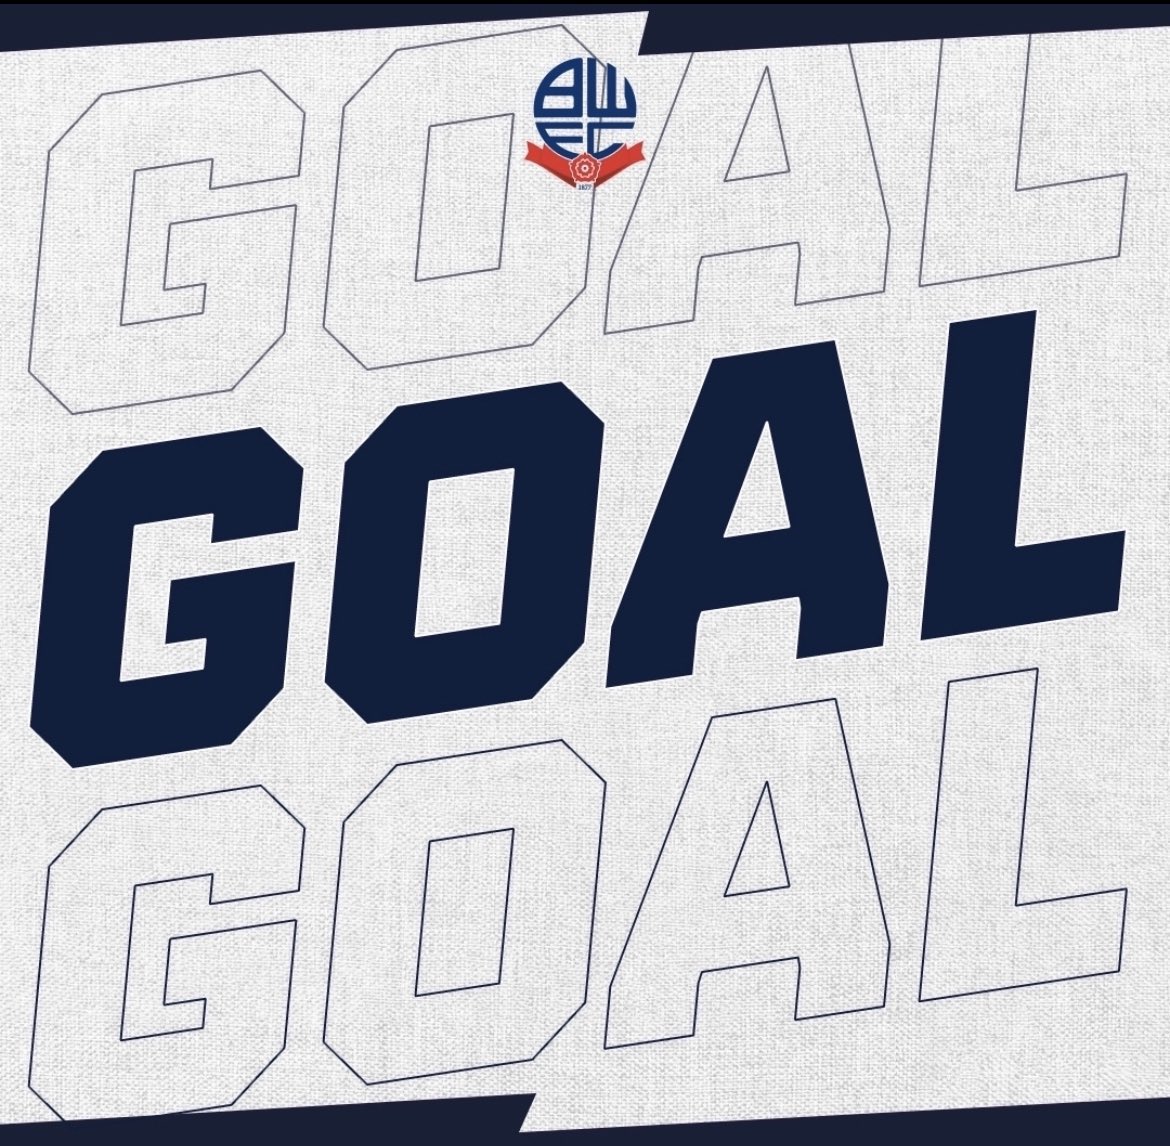 GOALLL! David Abimbola adds our second! Wanderers break down the right and this time it’s Oliver Smith finding Abimbola inside the box. [0-2] 69’ #bwfc